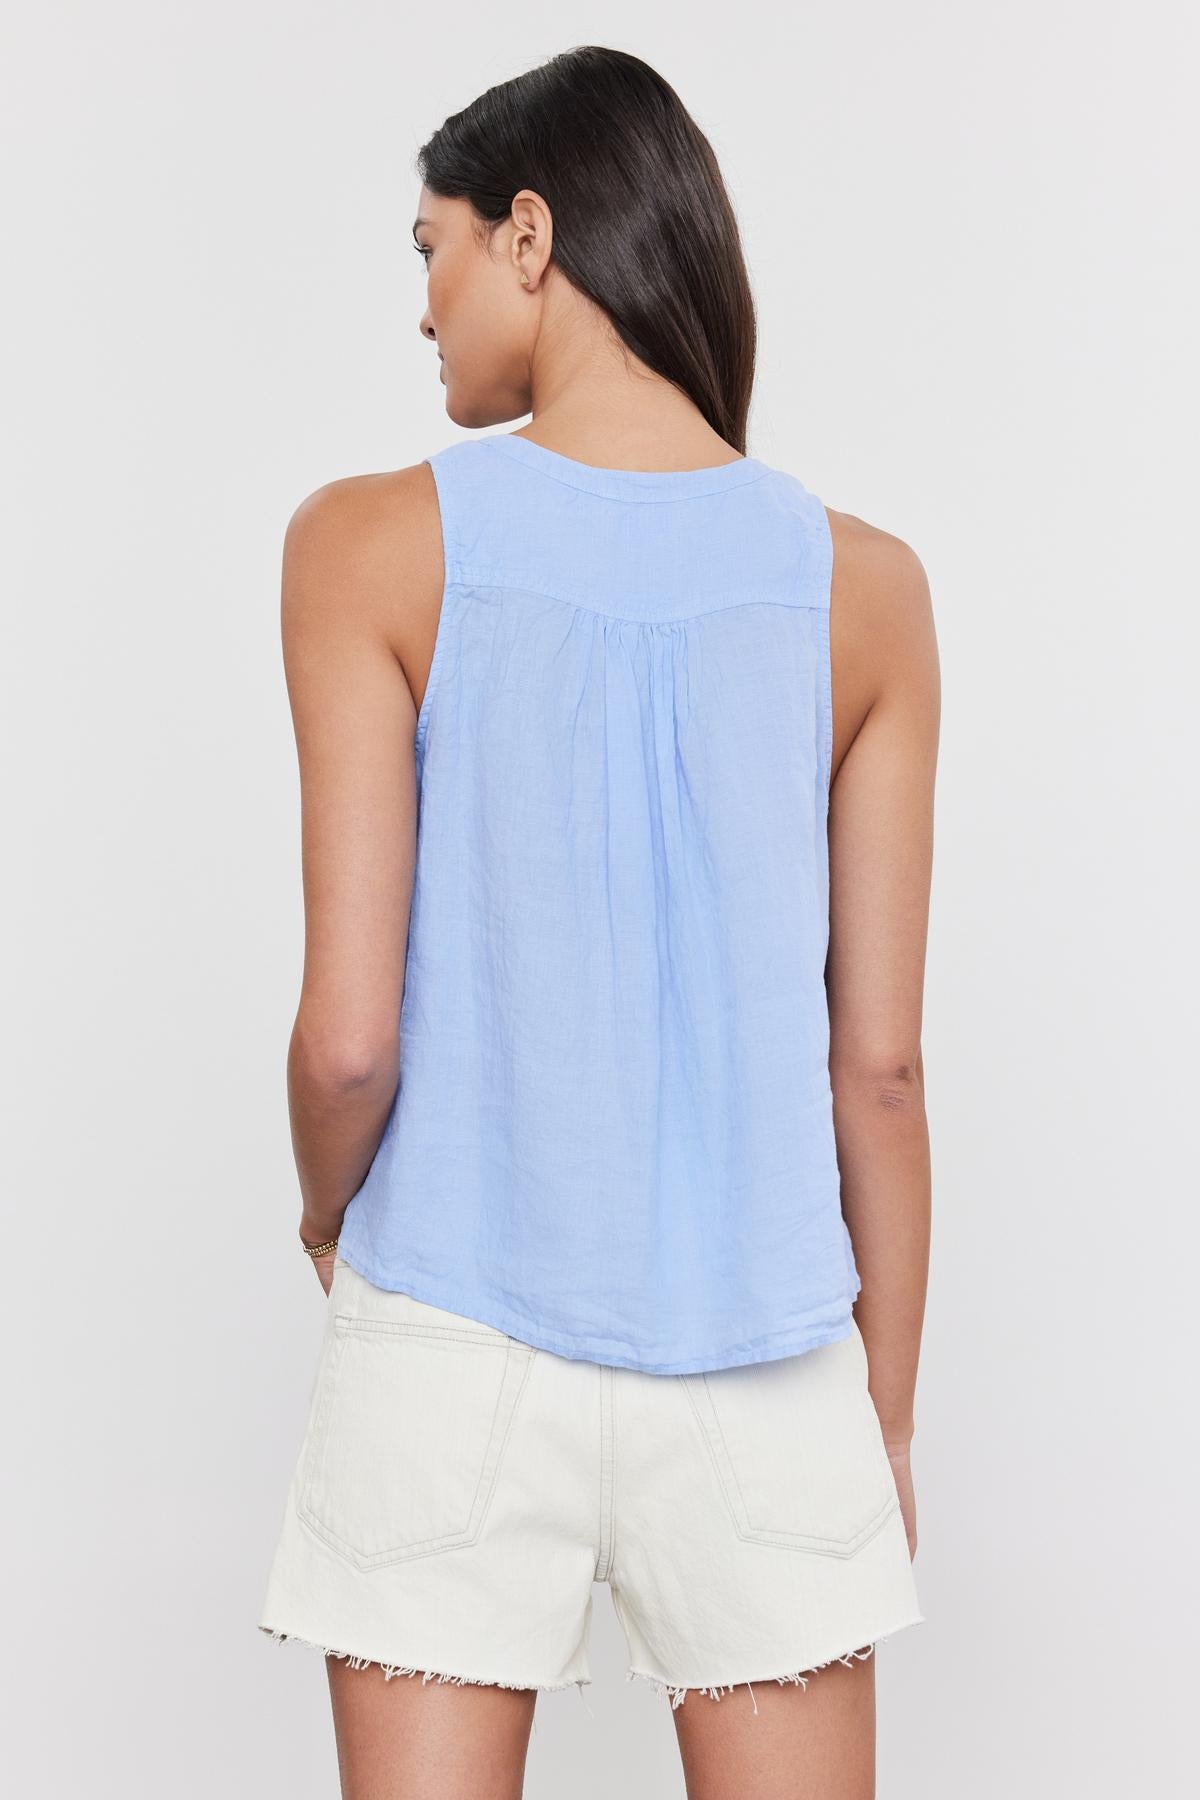 A woman with her back to the camera, wearing a Velvet by Graham & Spencer TACY LINEN TANK TOP in light blue and white shorts, standing against a plain background.-36752965468353